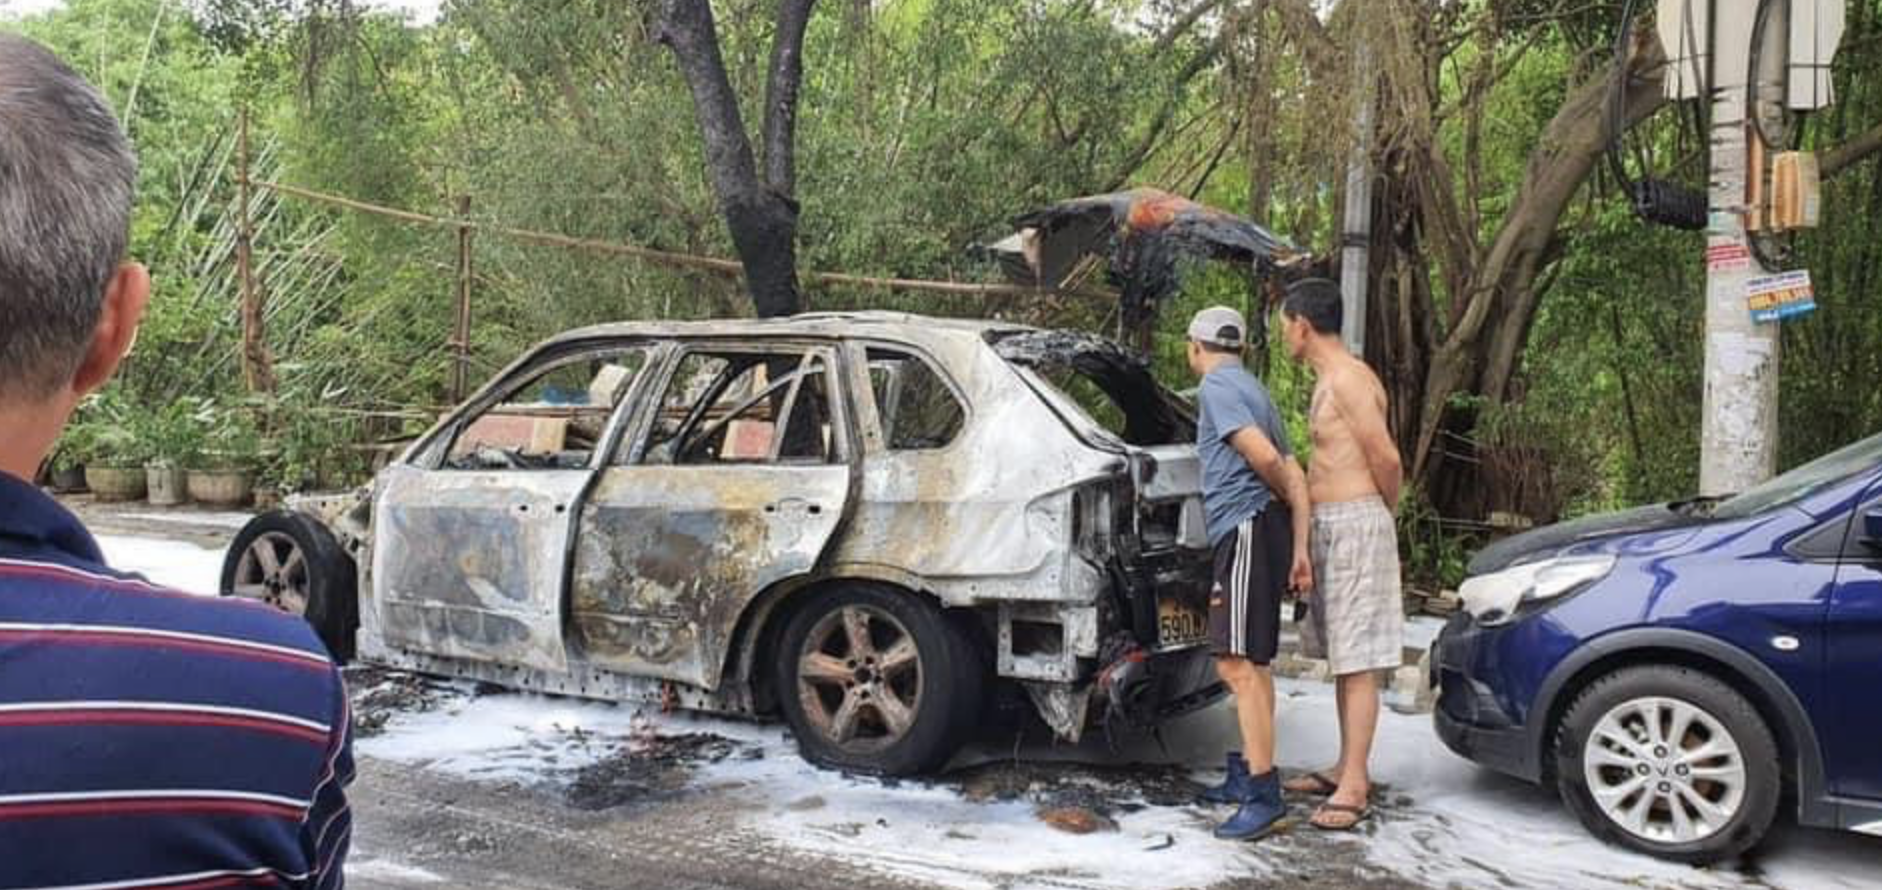 The car after the fire was extinguished. Photo: MXH